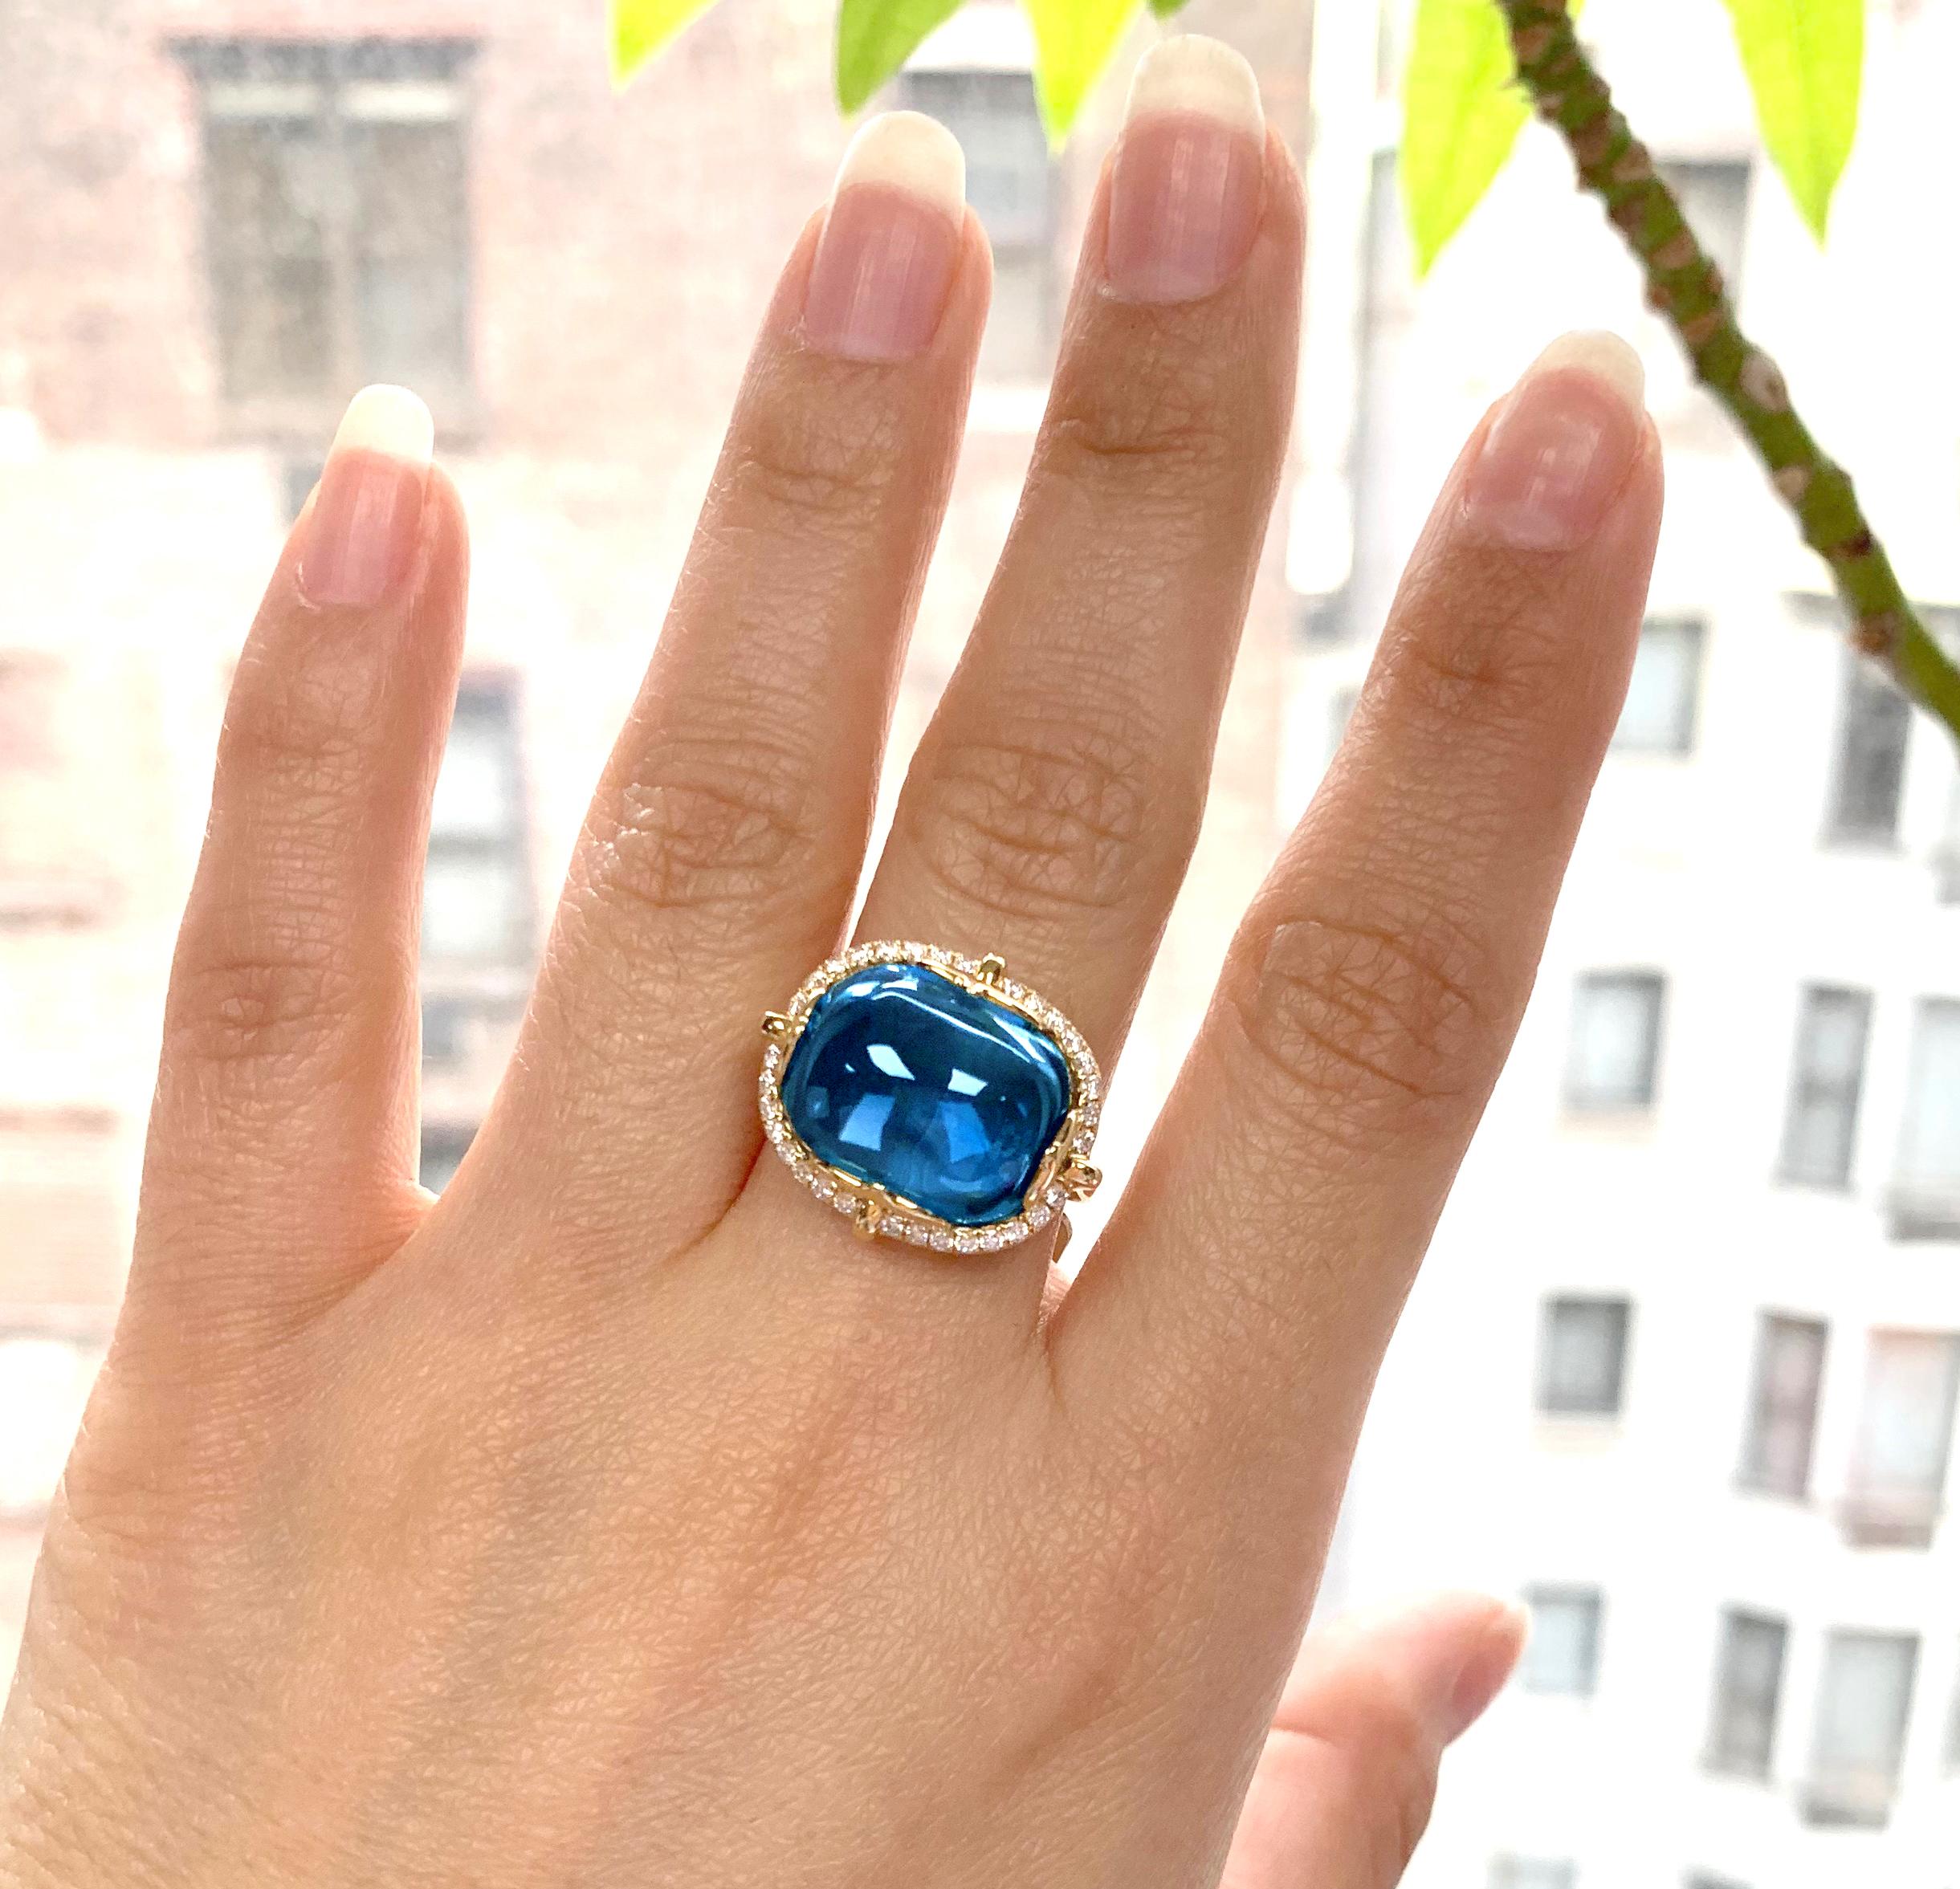 London Blue Topaz Cushion Cabochon Ring in 18K Yellow Gold with Diamonds, from 'Rock 'N Roll' Collection.
Please allow 4-5 weeks for this item to be delivered.

Stone Size: 16 x 13 mm

Diamonds: G-H / VS, Approx. Wt.: 0.36 Carats